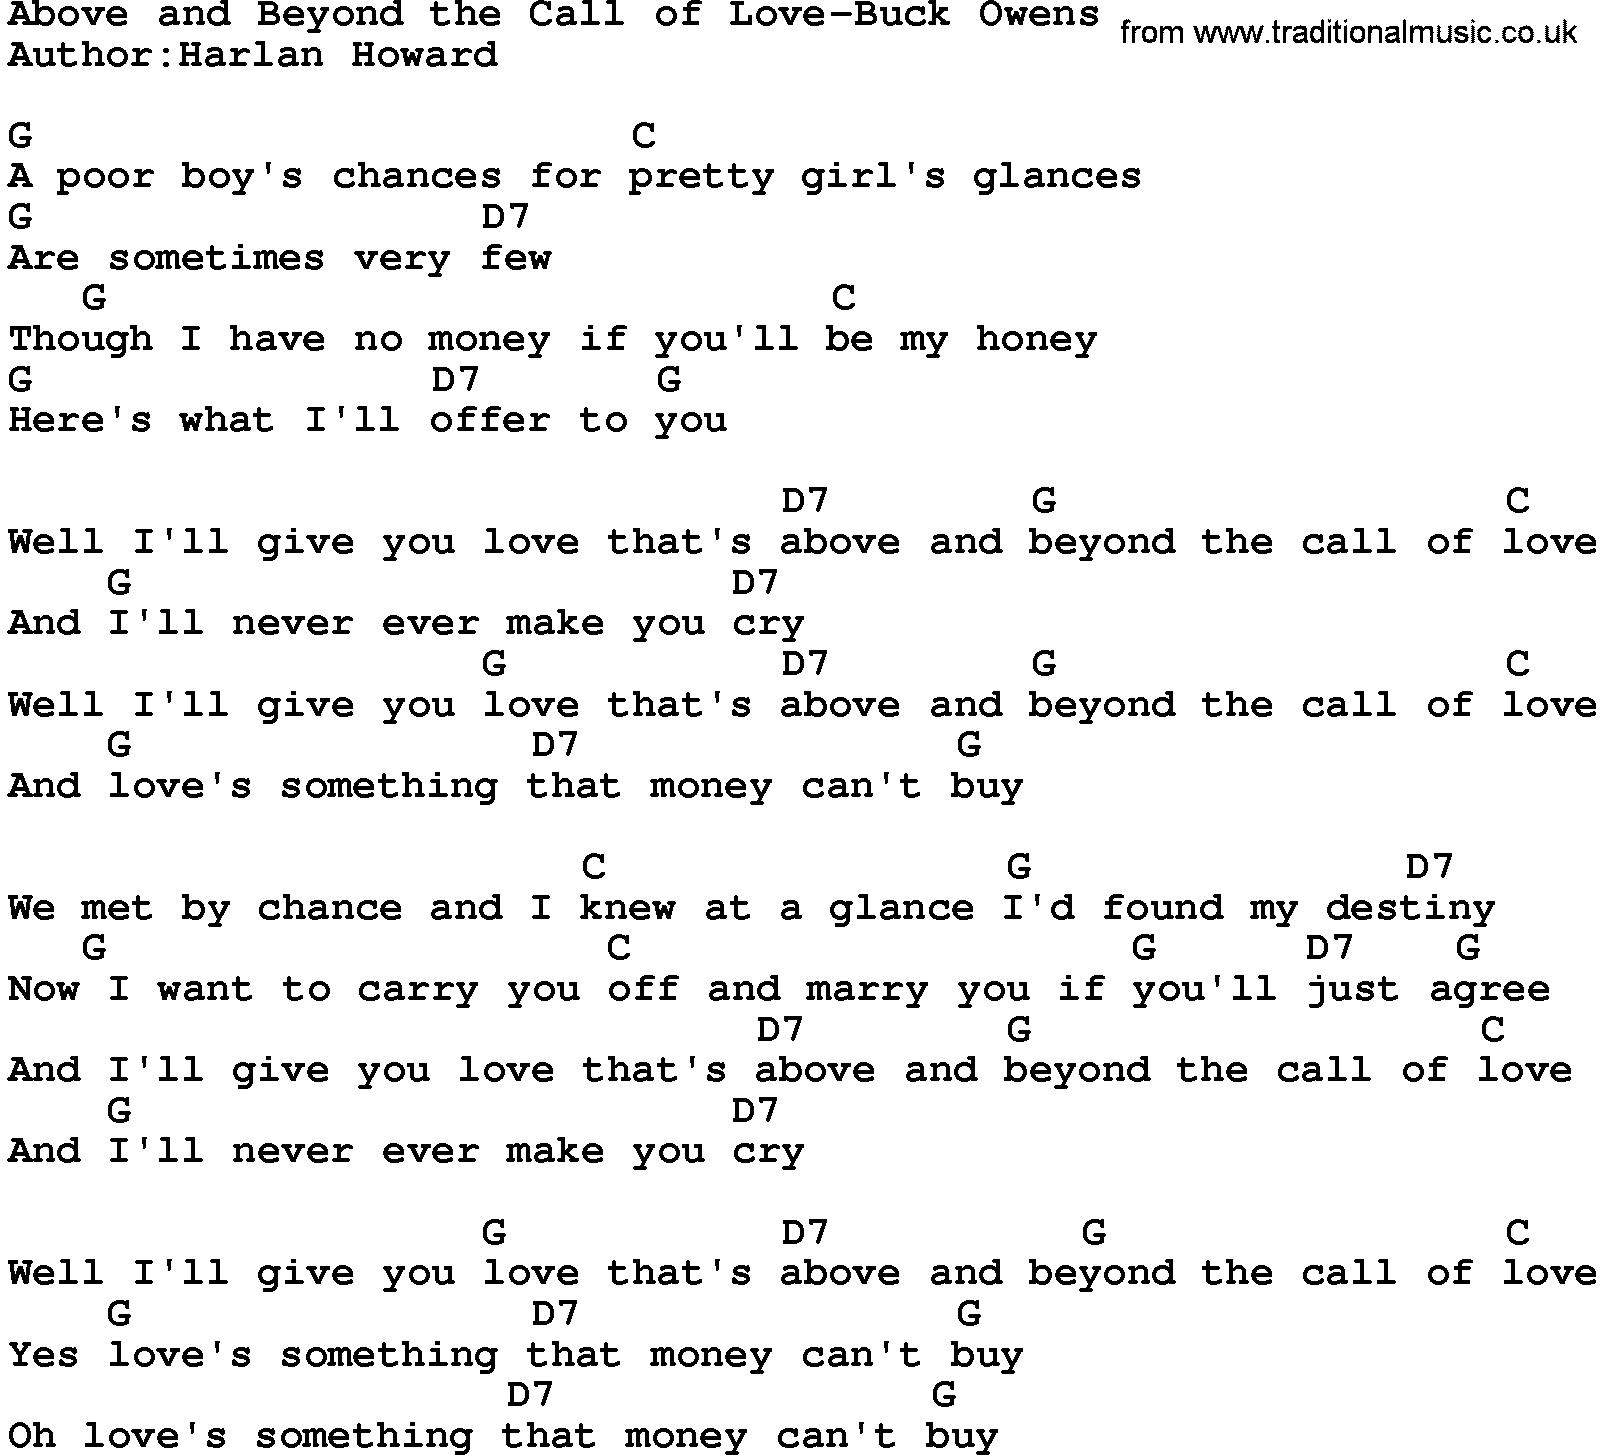 Country music song: Above And Beyond The Call Of Love-Buck Owens lyrics and chords